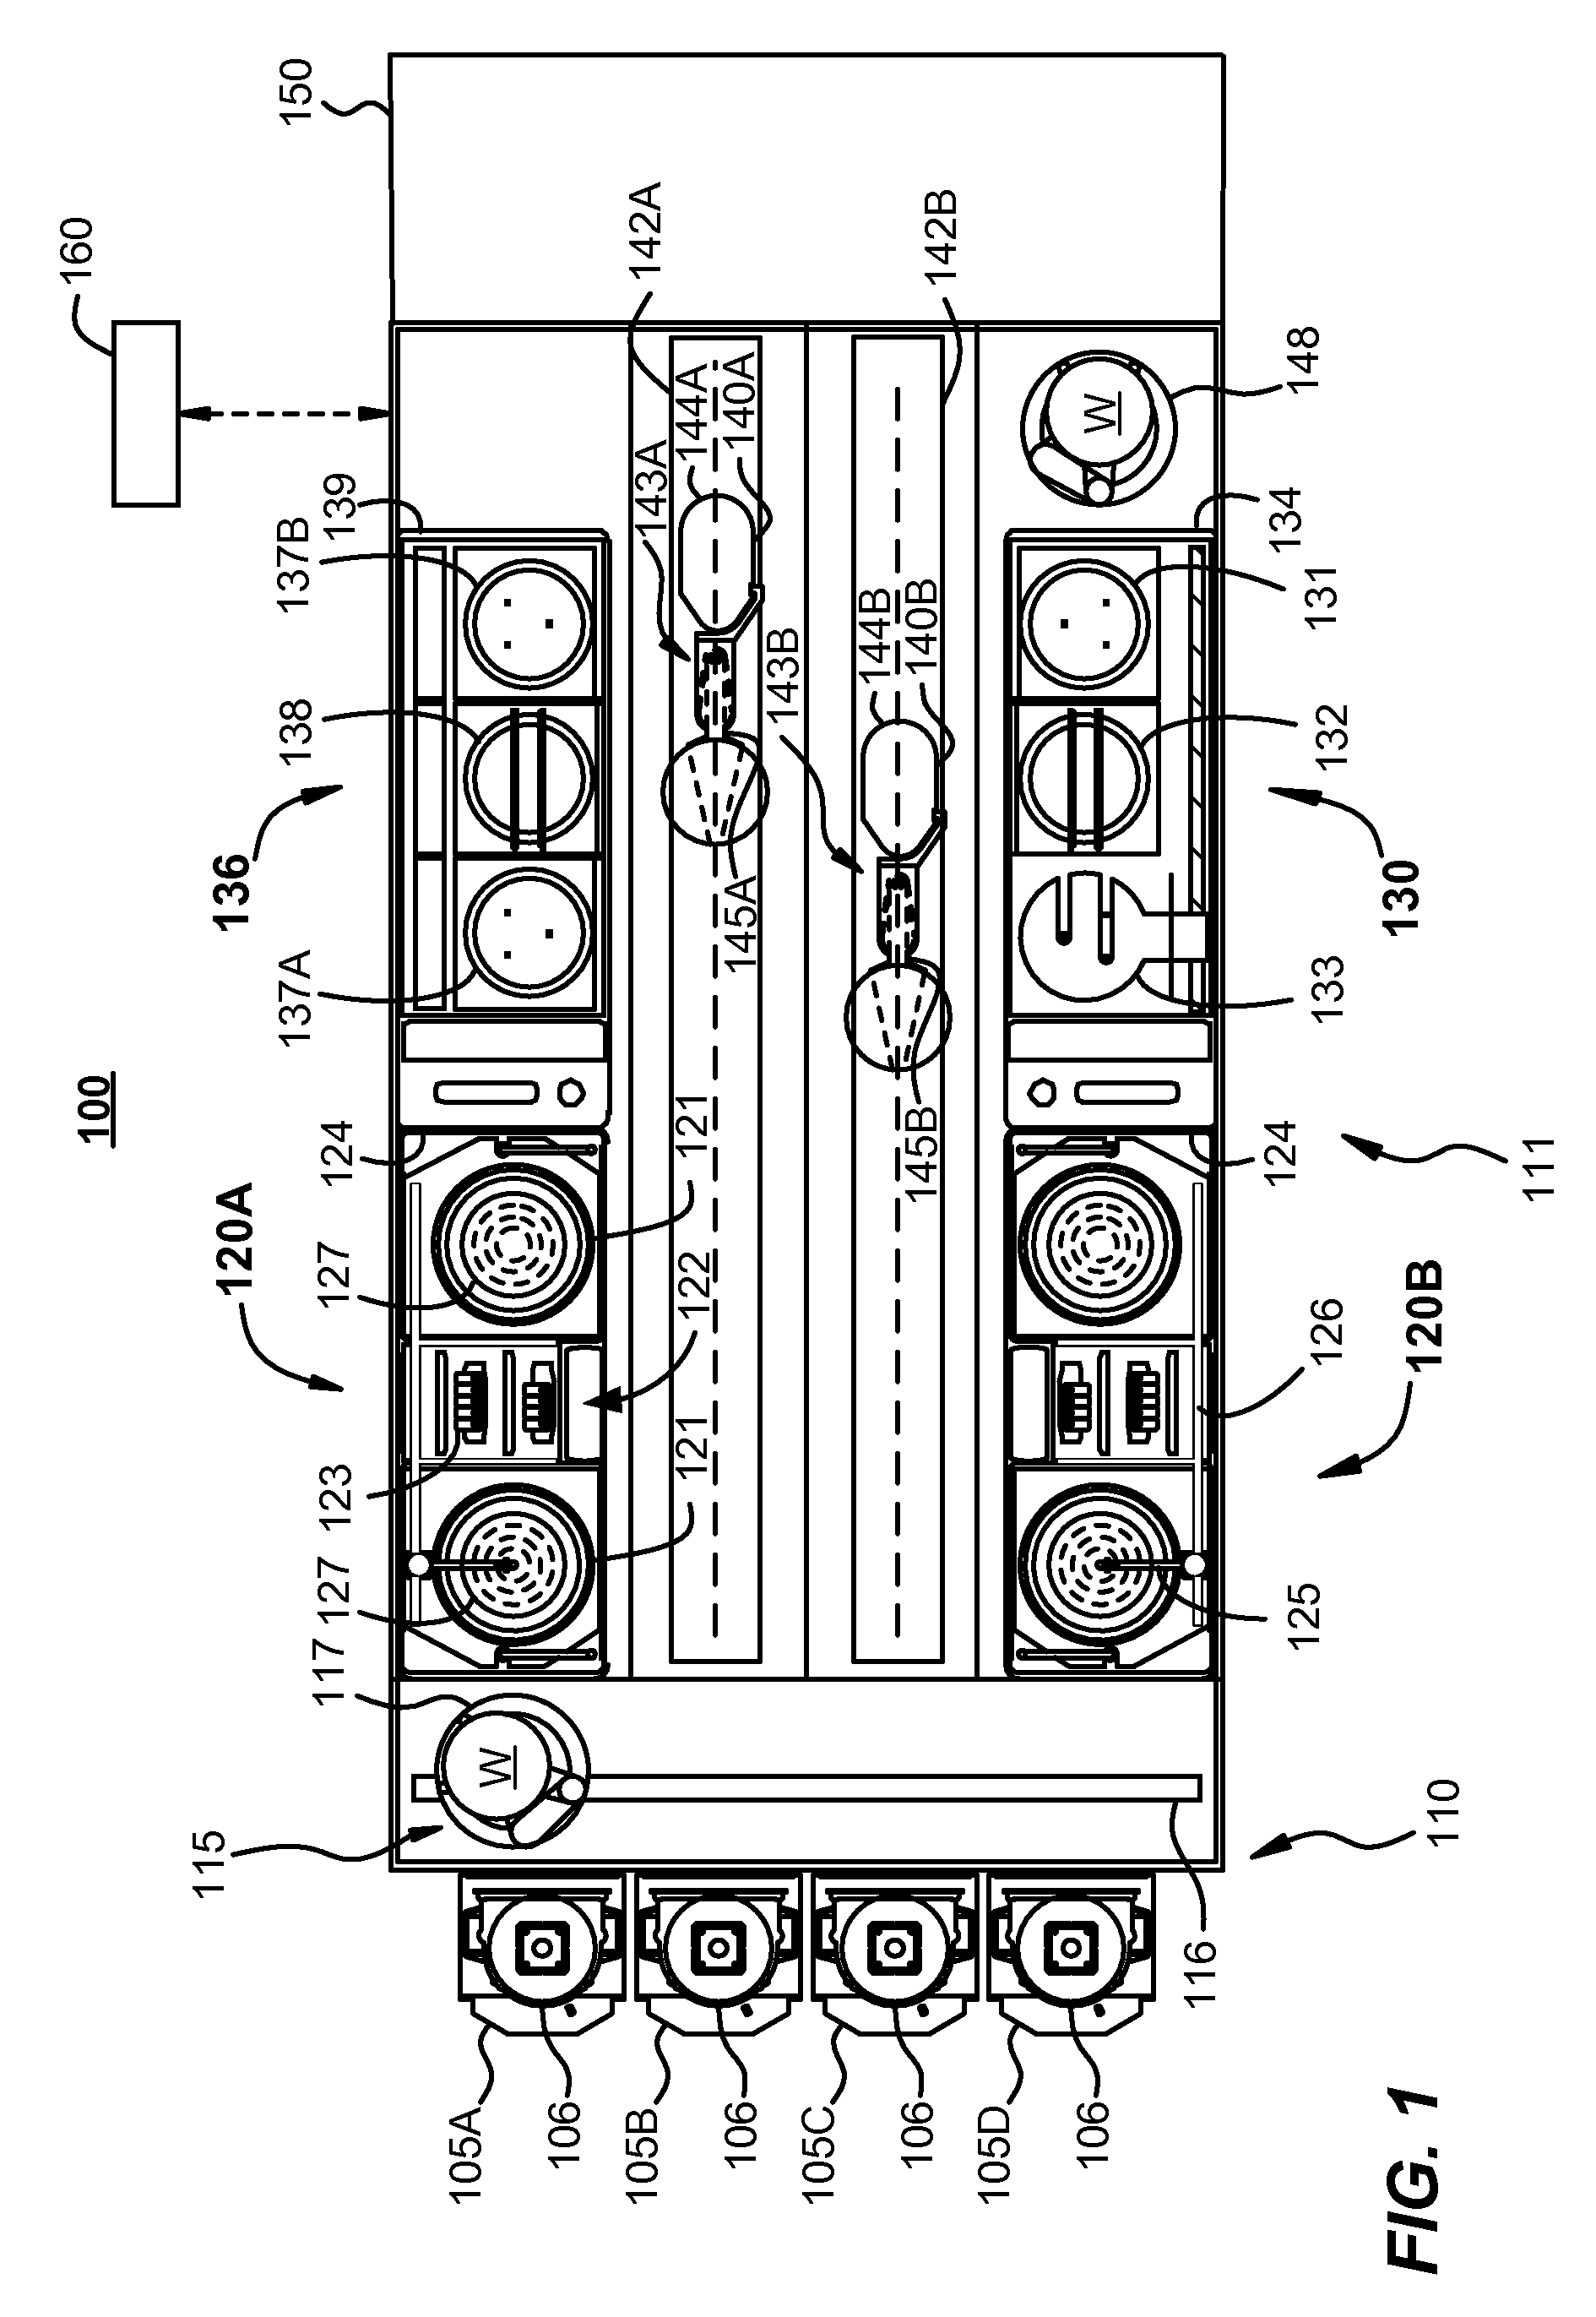 Methods and systems for performing real-time wireless temperature measurement for semiconductor substrates